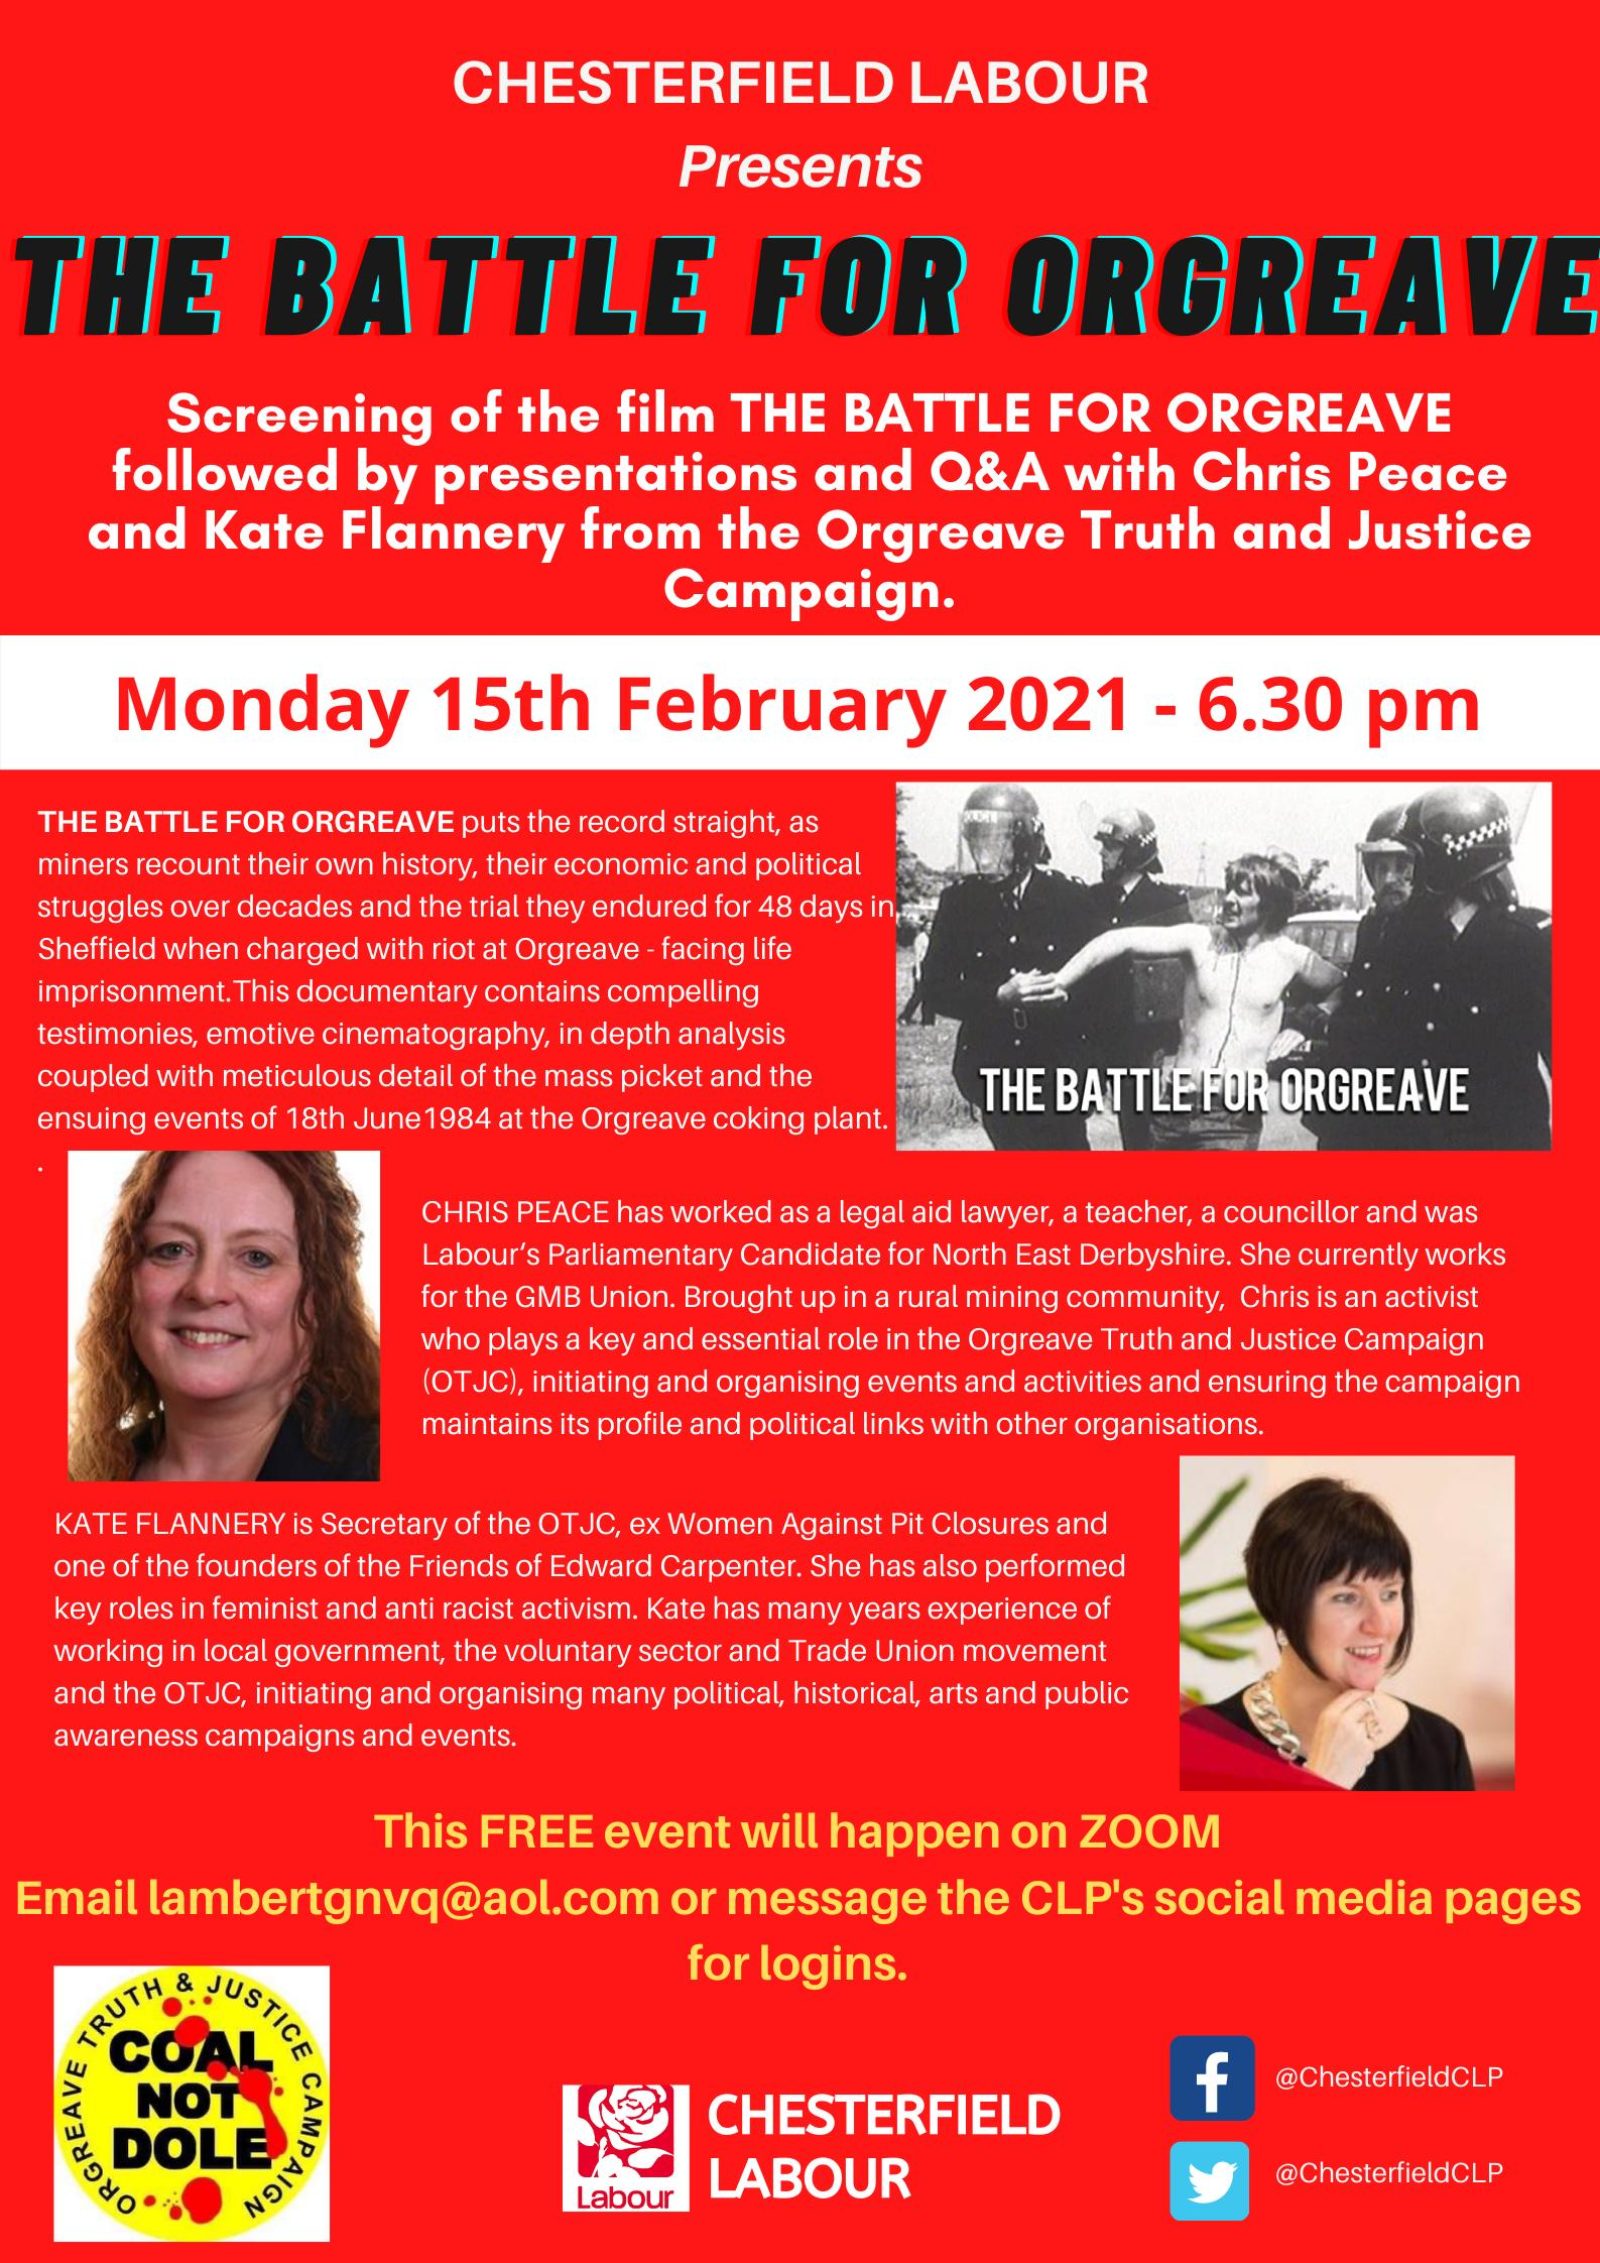 Join us via Zoom on Monday 16th February, at 6.30pm for a FREE screening of the film The Battle for Orgreave, followed by presentations and Q&A with Chris Peace and Kate Flannery of The Orgreave Truth & Justice Campaign. Message this page or the CLP Secretary at lambertgnvq@aol.com for logins.